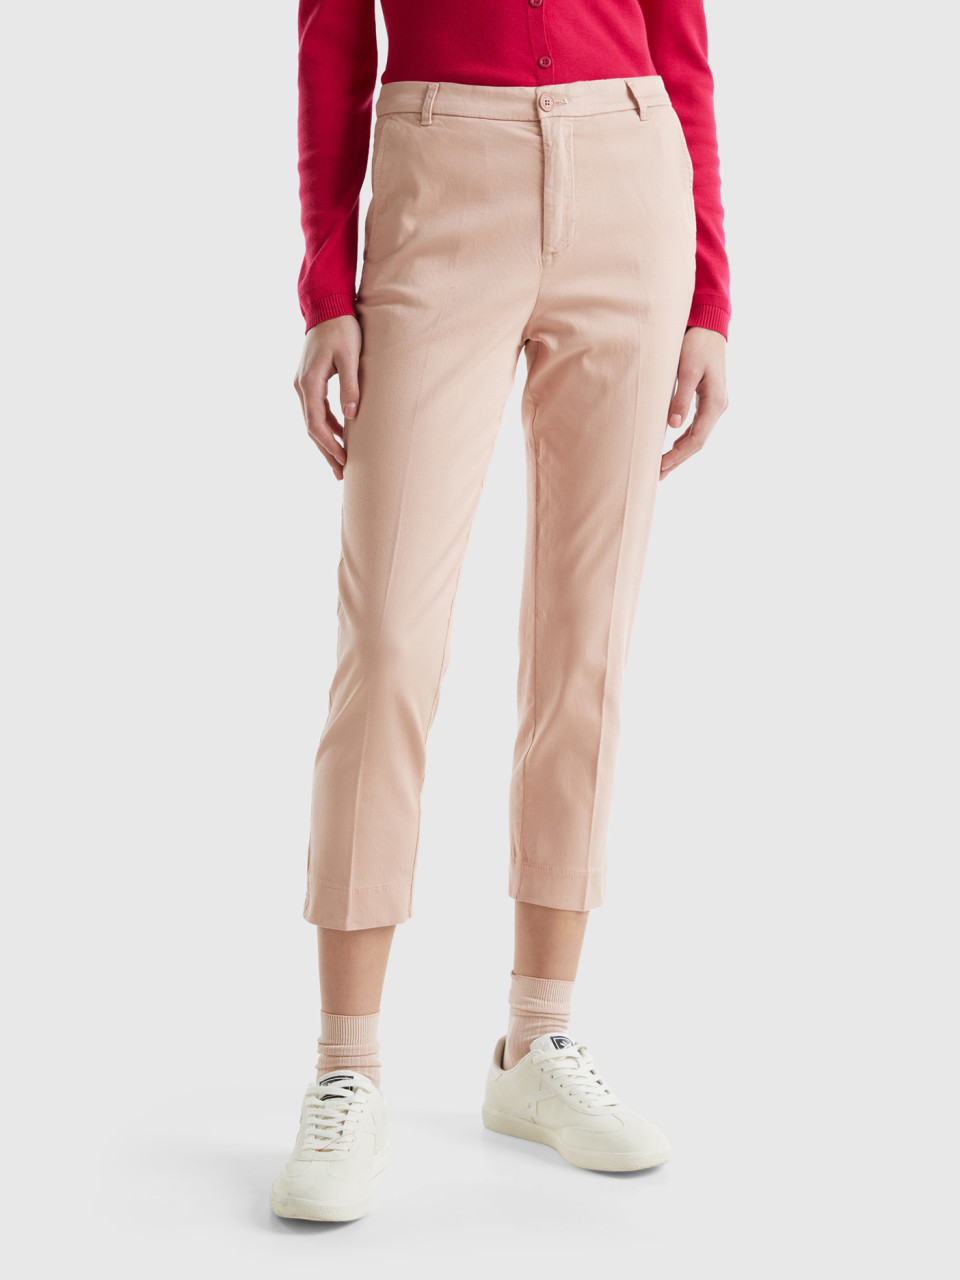 Benetton, Chino Cropped In Cotone Stretch, Rosa Carne, Donna